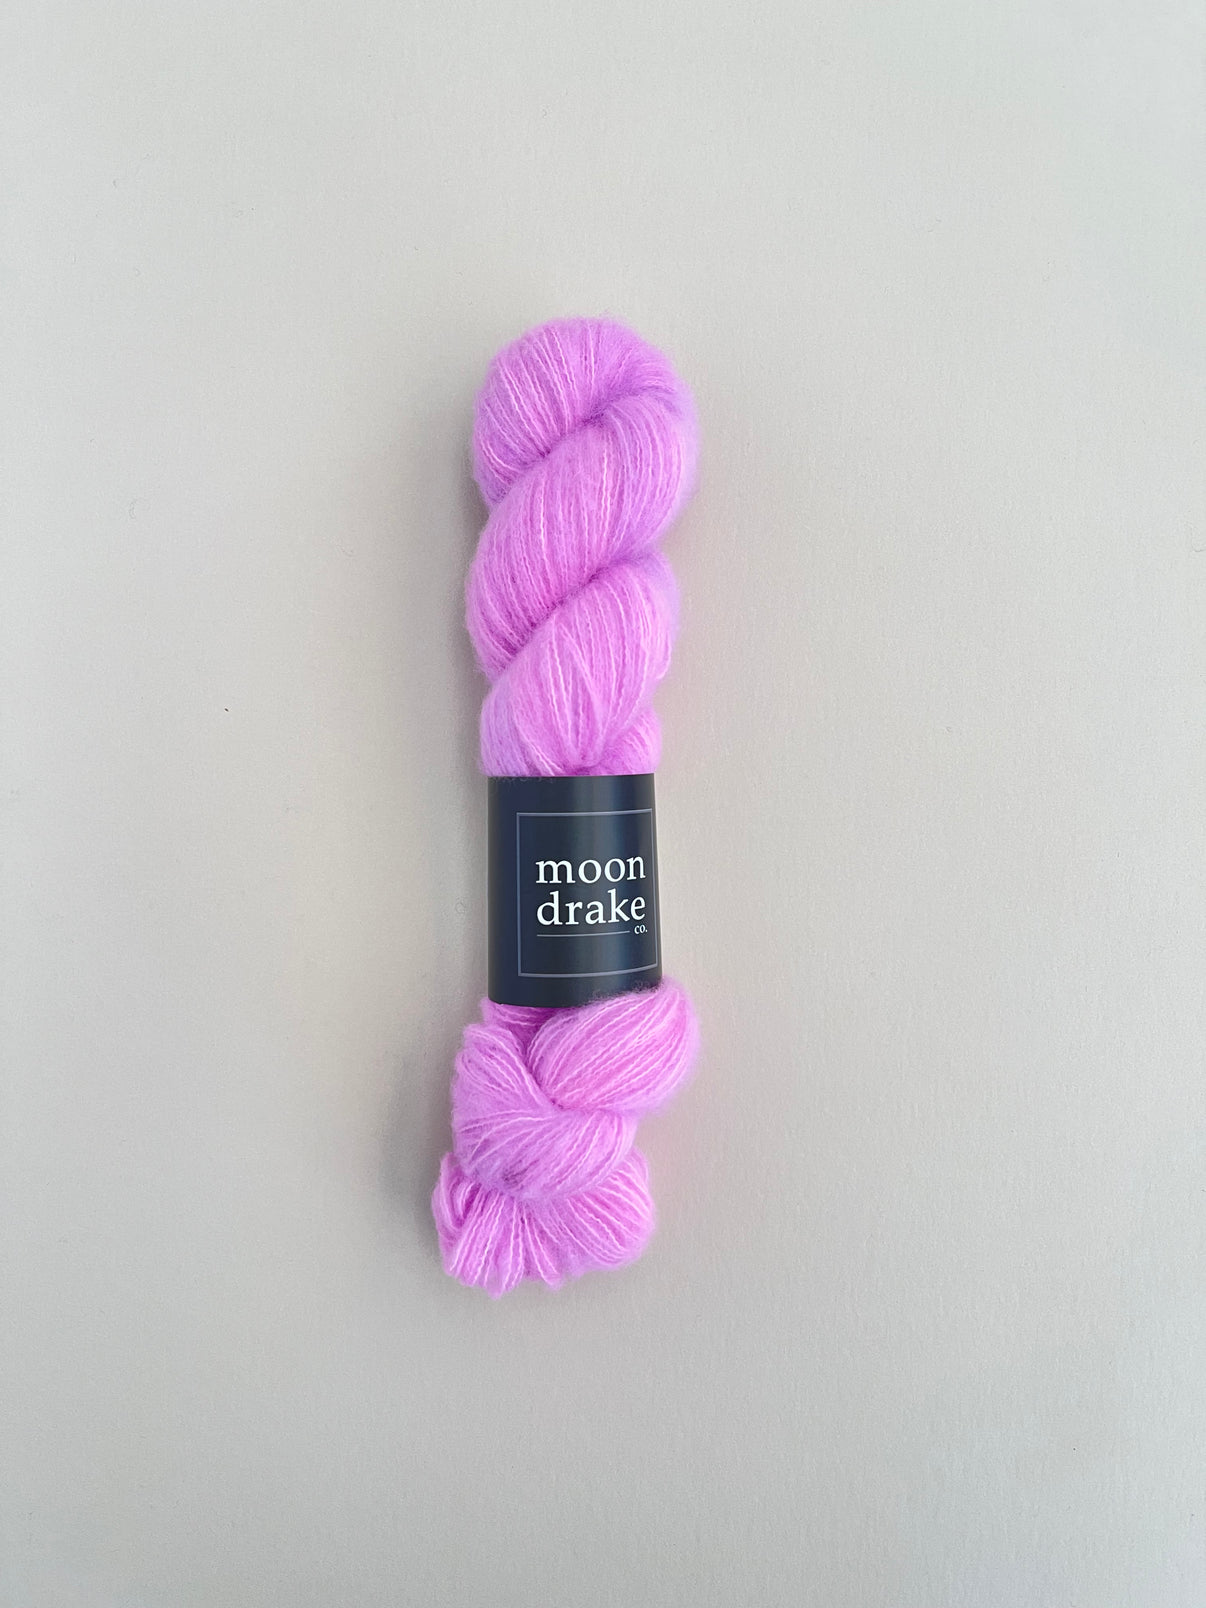 A lavender skein of brushed cashmere yarn with a soft halo of texture.